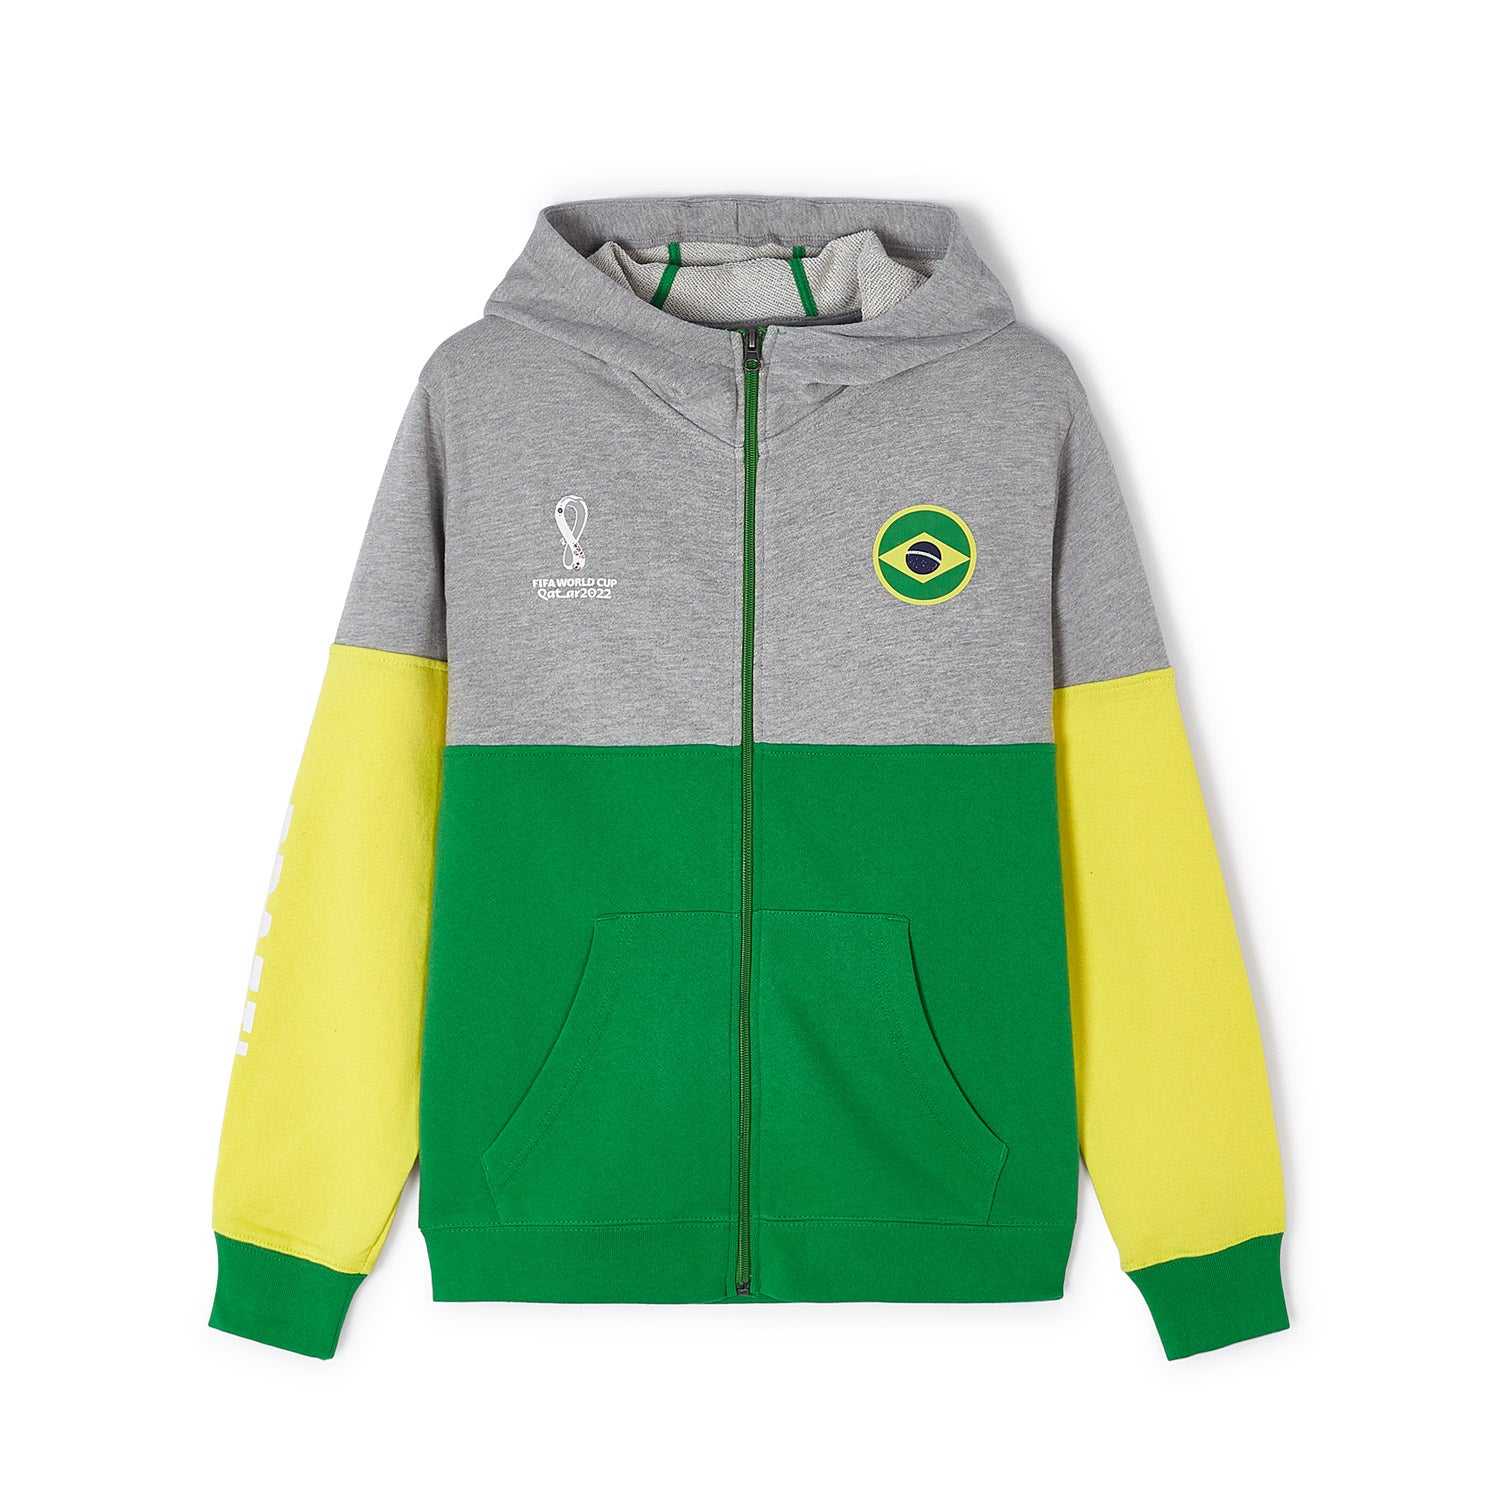 2022 World Cup Brazil Green Hoodie - Youth